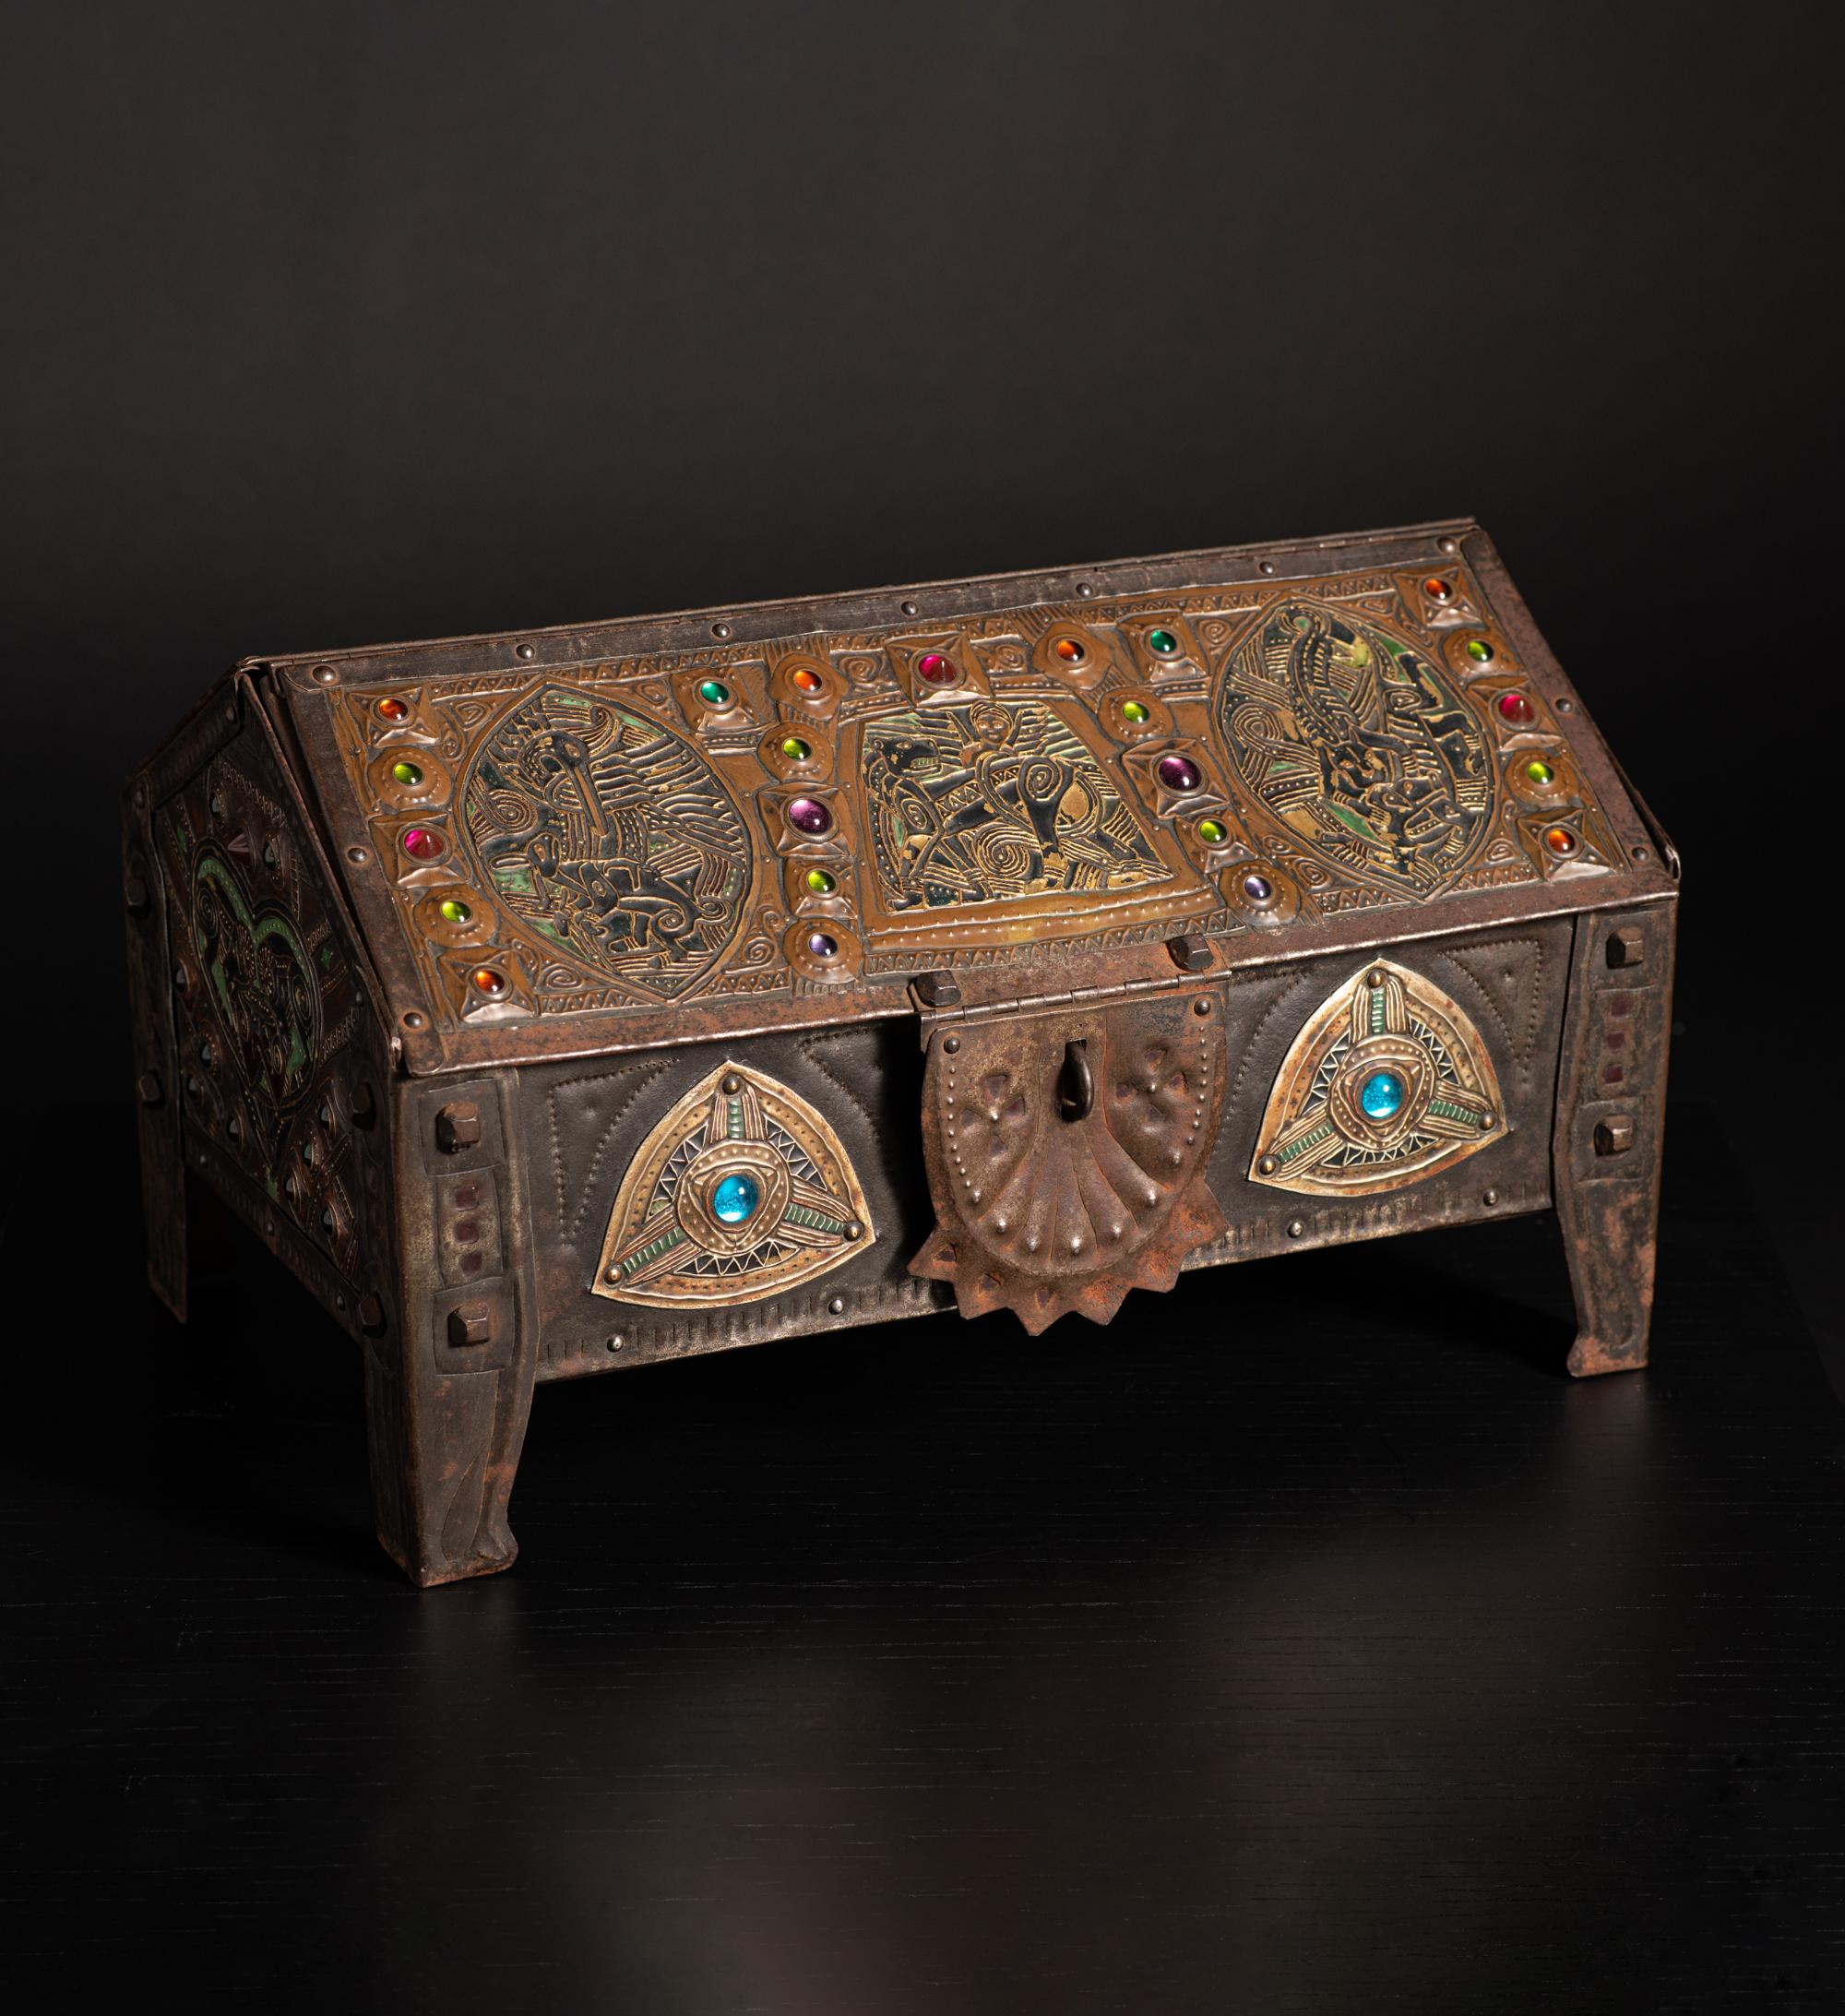 Box contains moonstones in addition to the glass cabochons.

Alfred Louis Achille DAGUET (1875 - 1942) was a metalsmith active in Paris during the first part of the 20th century. His metalwork created prior to the outbreak of World War I, noteworthy